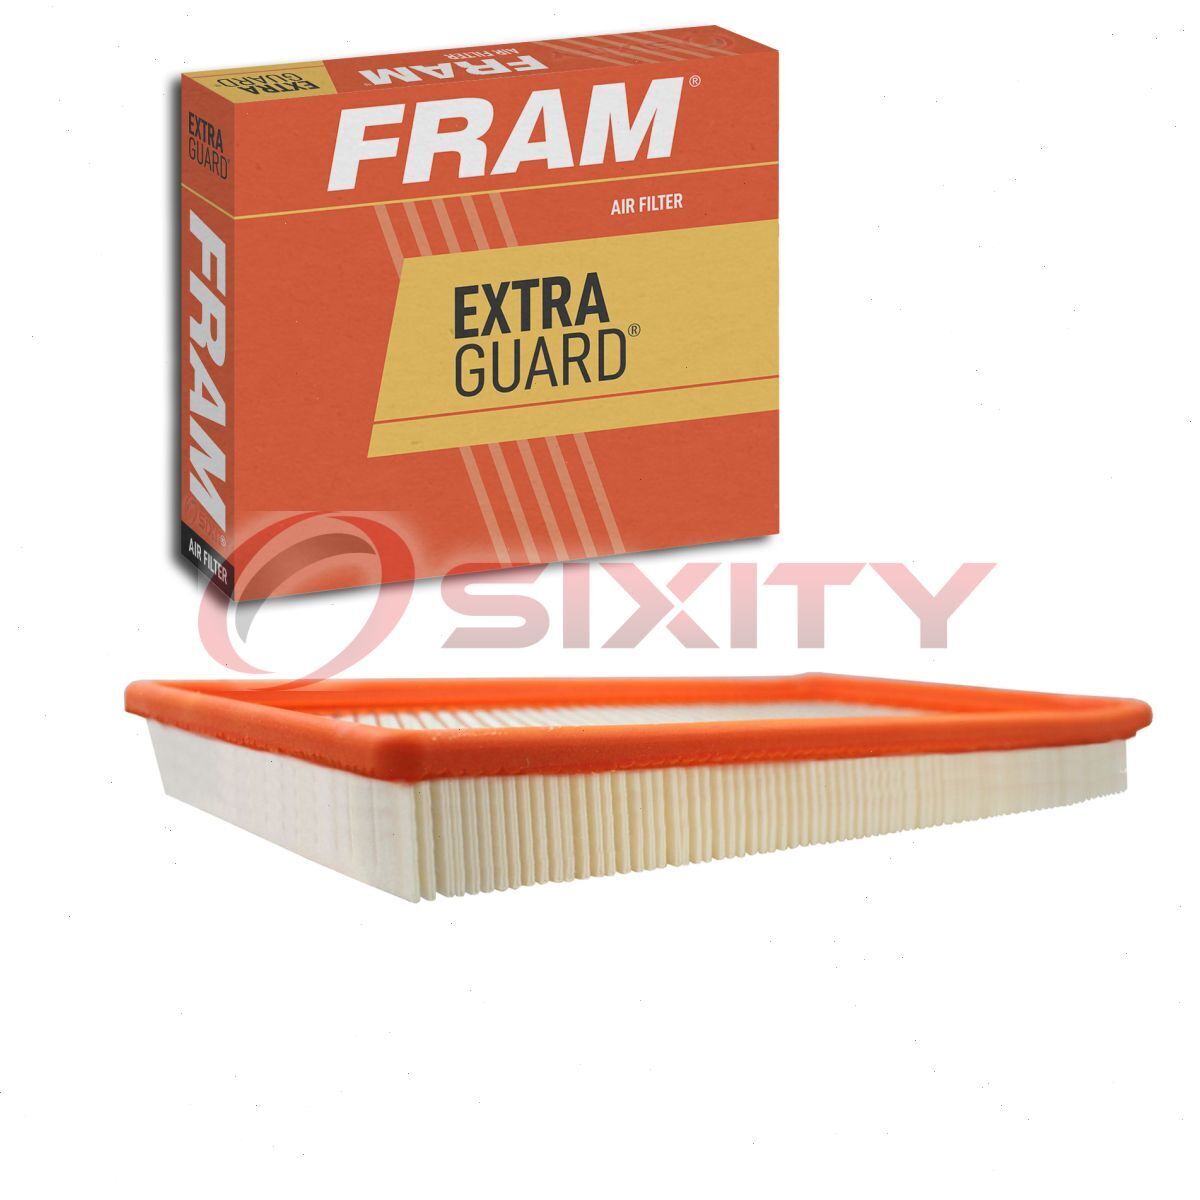 FRAM Extra Guard Air Filter for 1988-1990 Ford Bronco II Intake Inlet vx